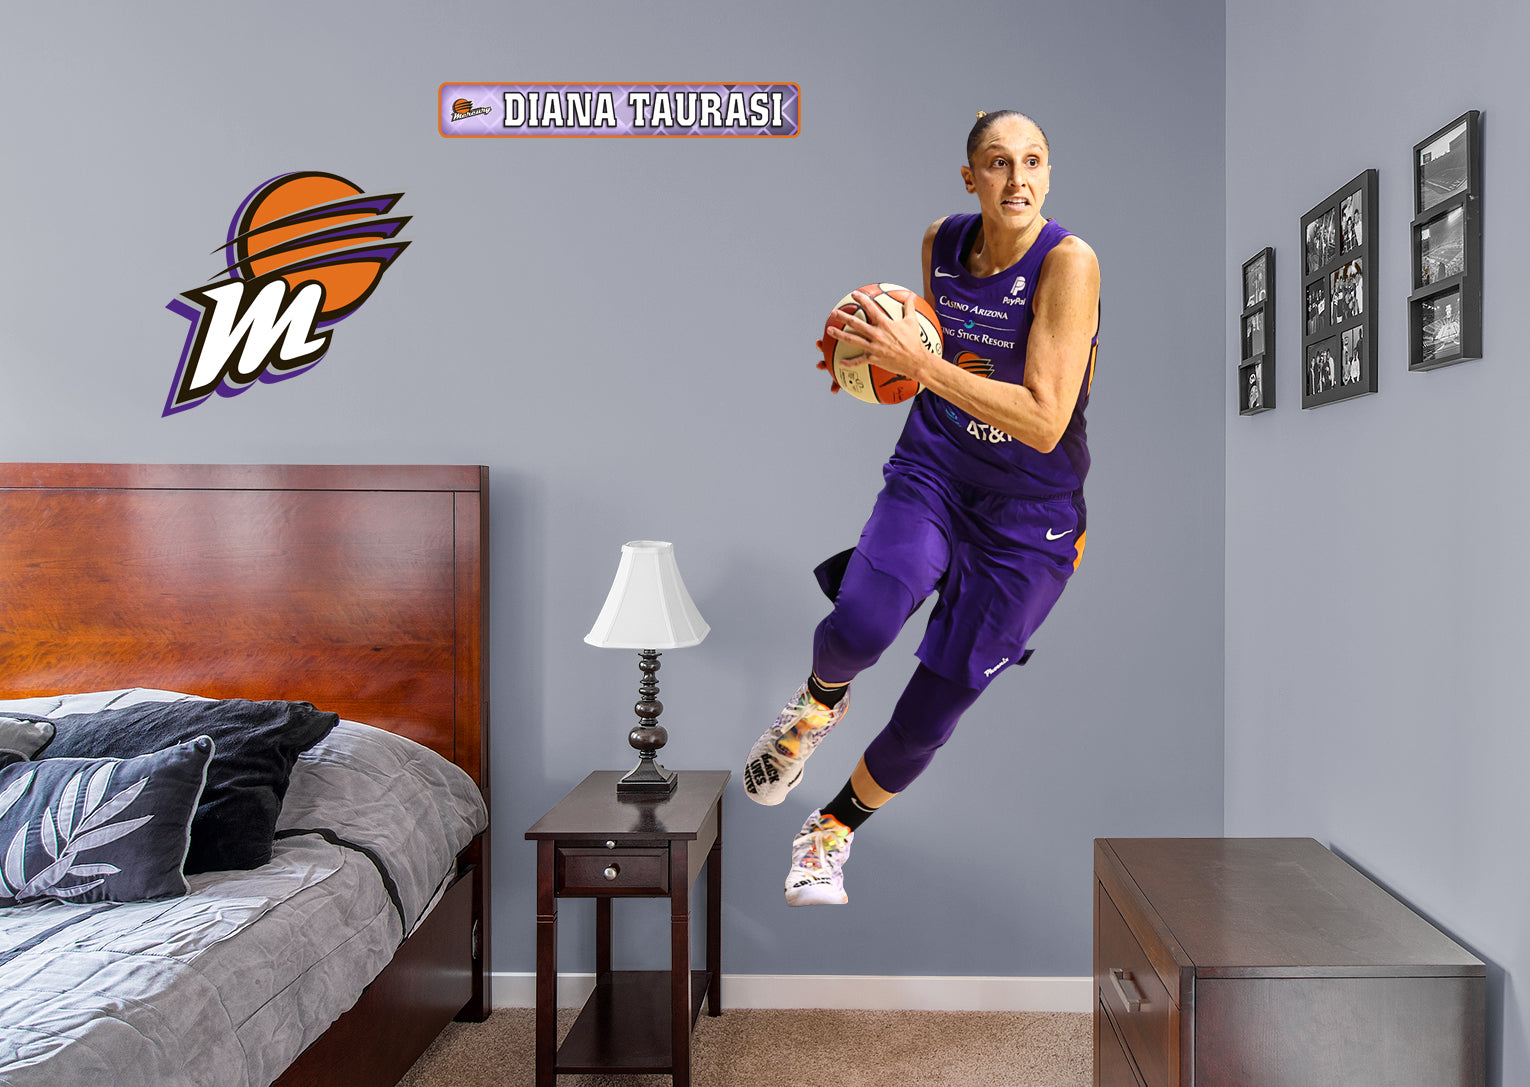 Diana Taurasi 2020 RealBig for Phoenix Mercury - Officially Licensed WNBA Removable Wall Decal Life-Size Athlete + 2 Decals (35"